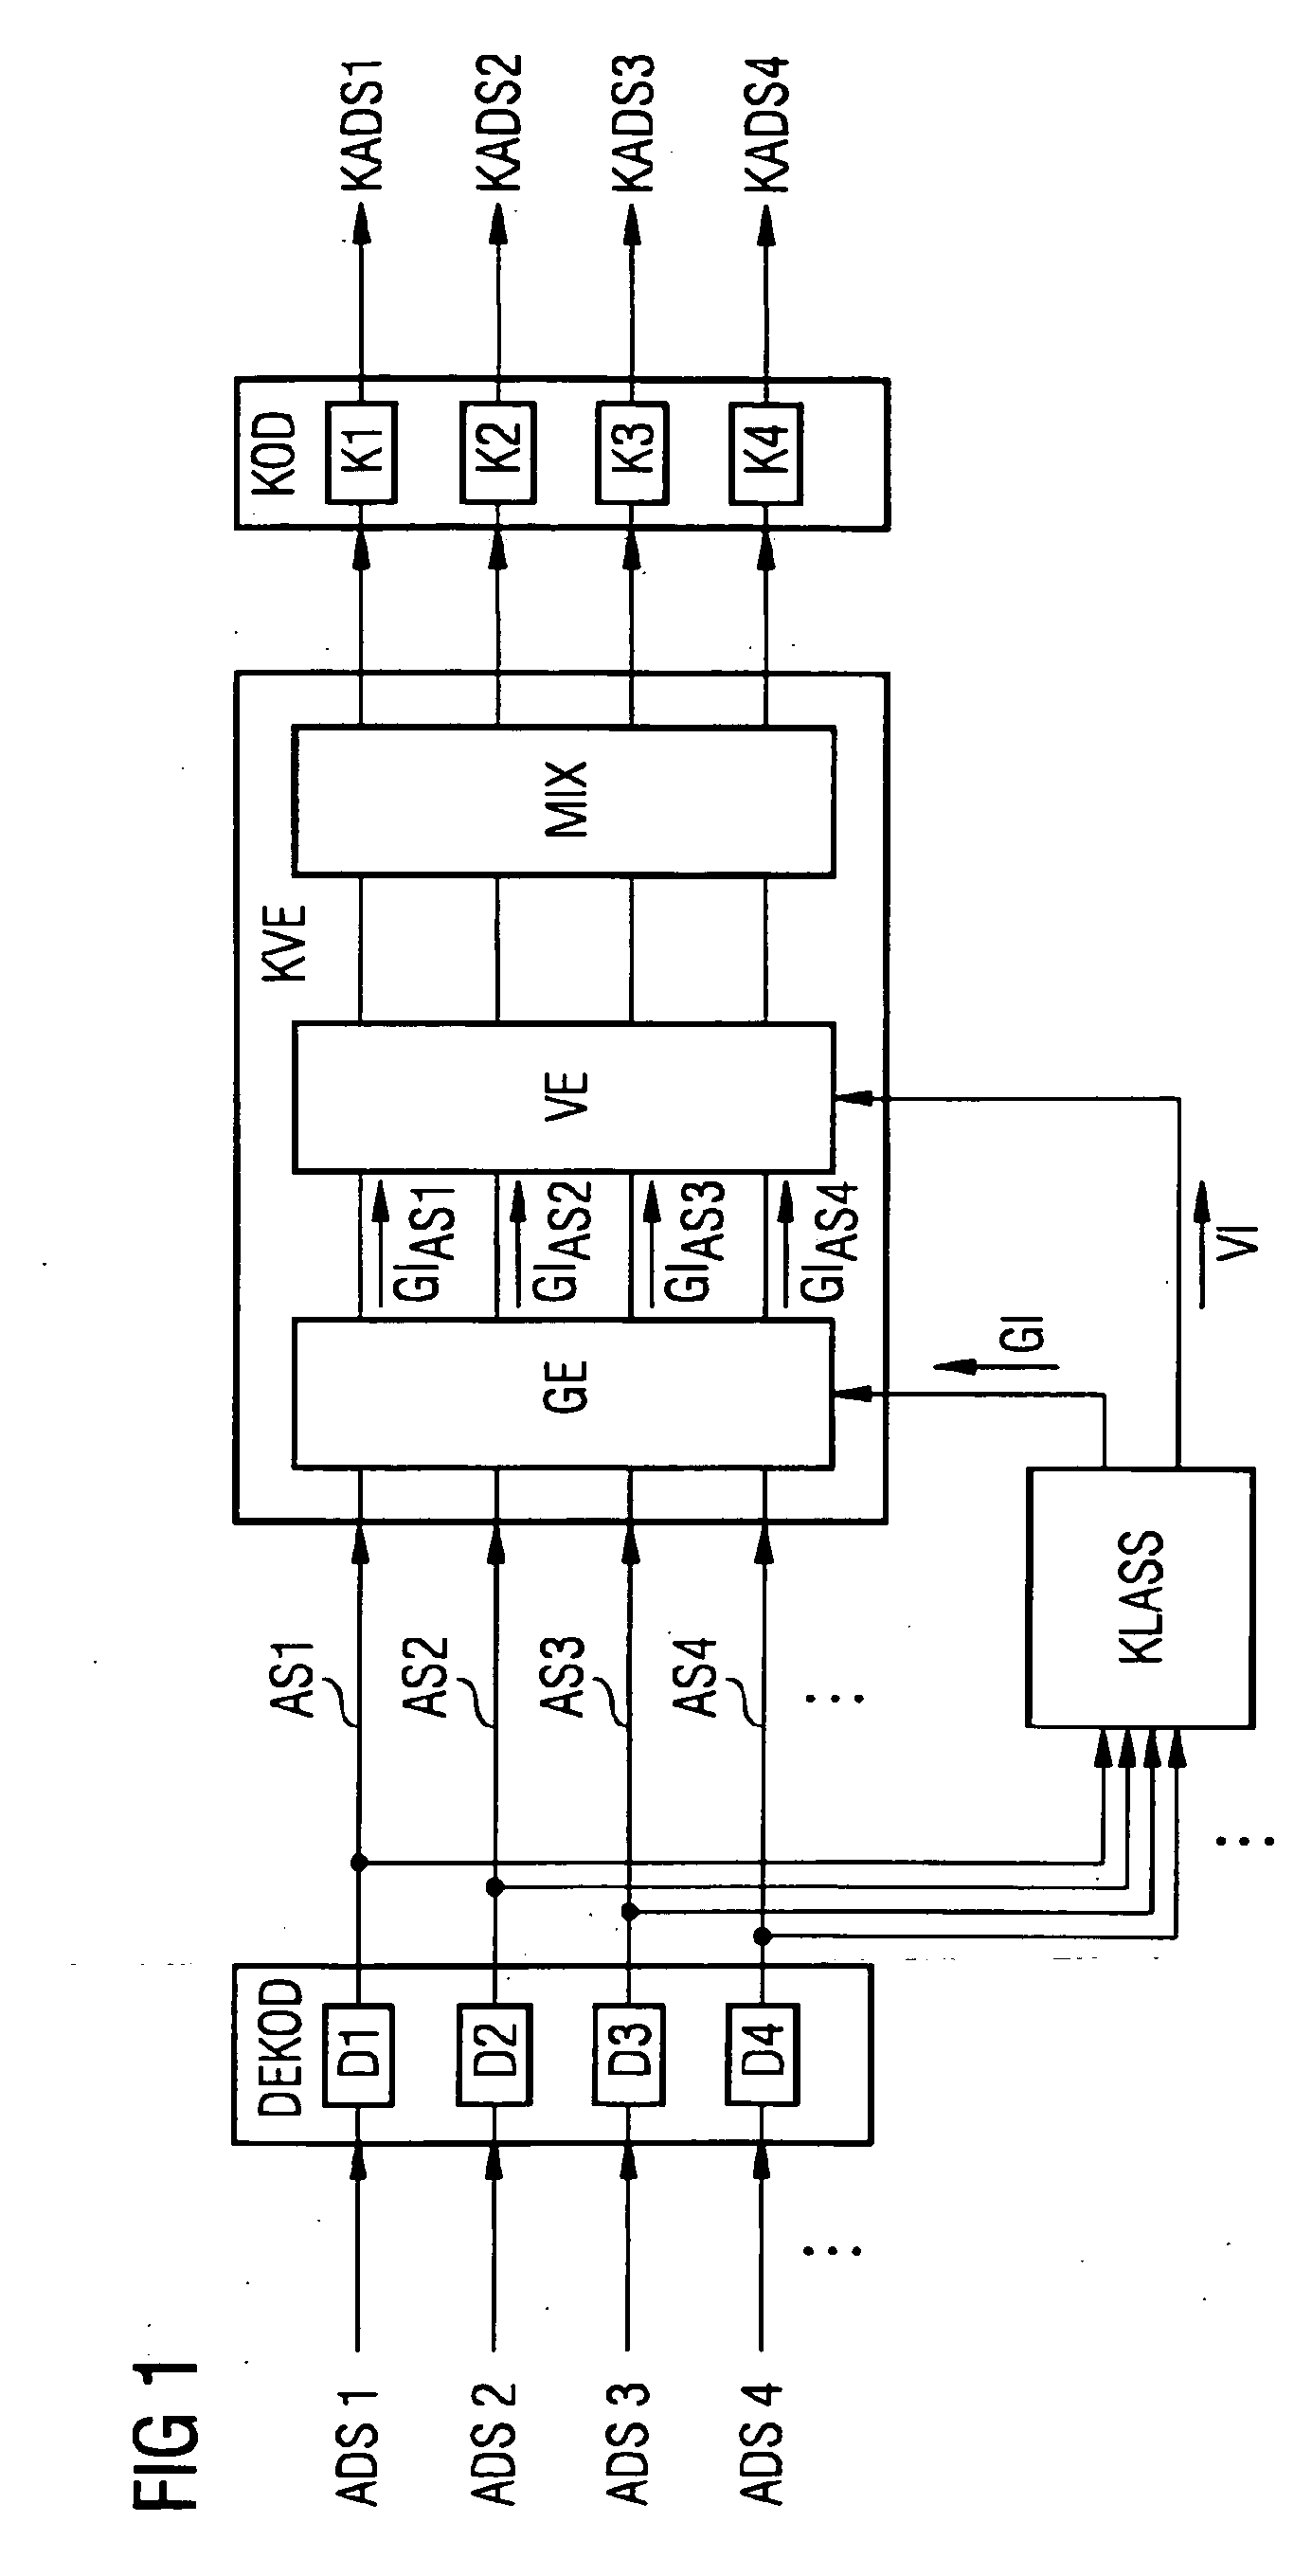 Method for carrying out an audio conference, audio conference device, and method for switching between encoders